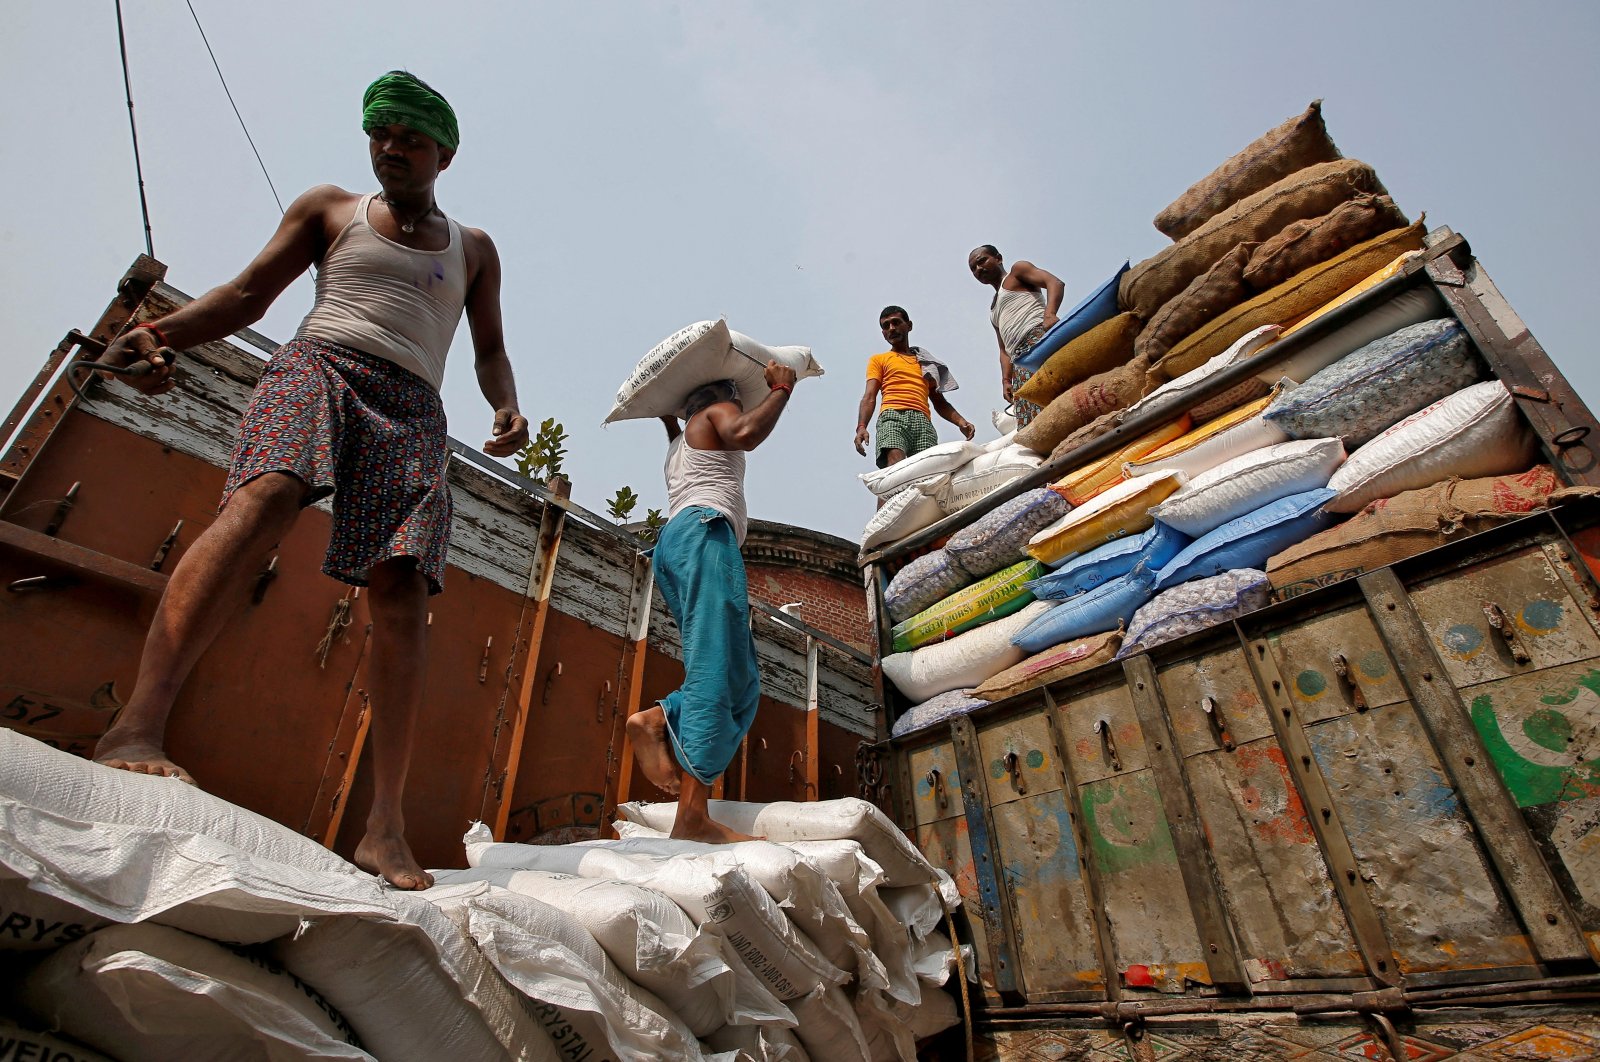 A laborer carries a sack filled with sugar to load it onto a supply truck at a wholesale market in Kolkata, India, Nov. 14, 2018. (Reuters Photo)